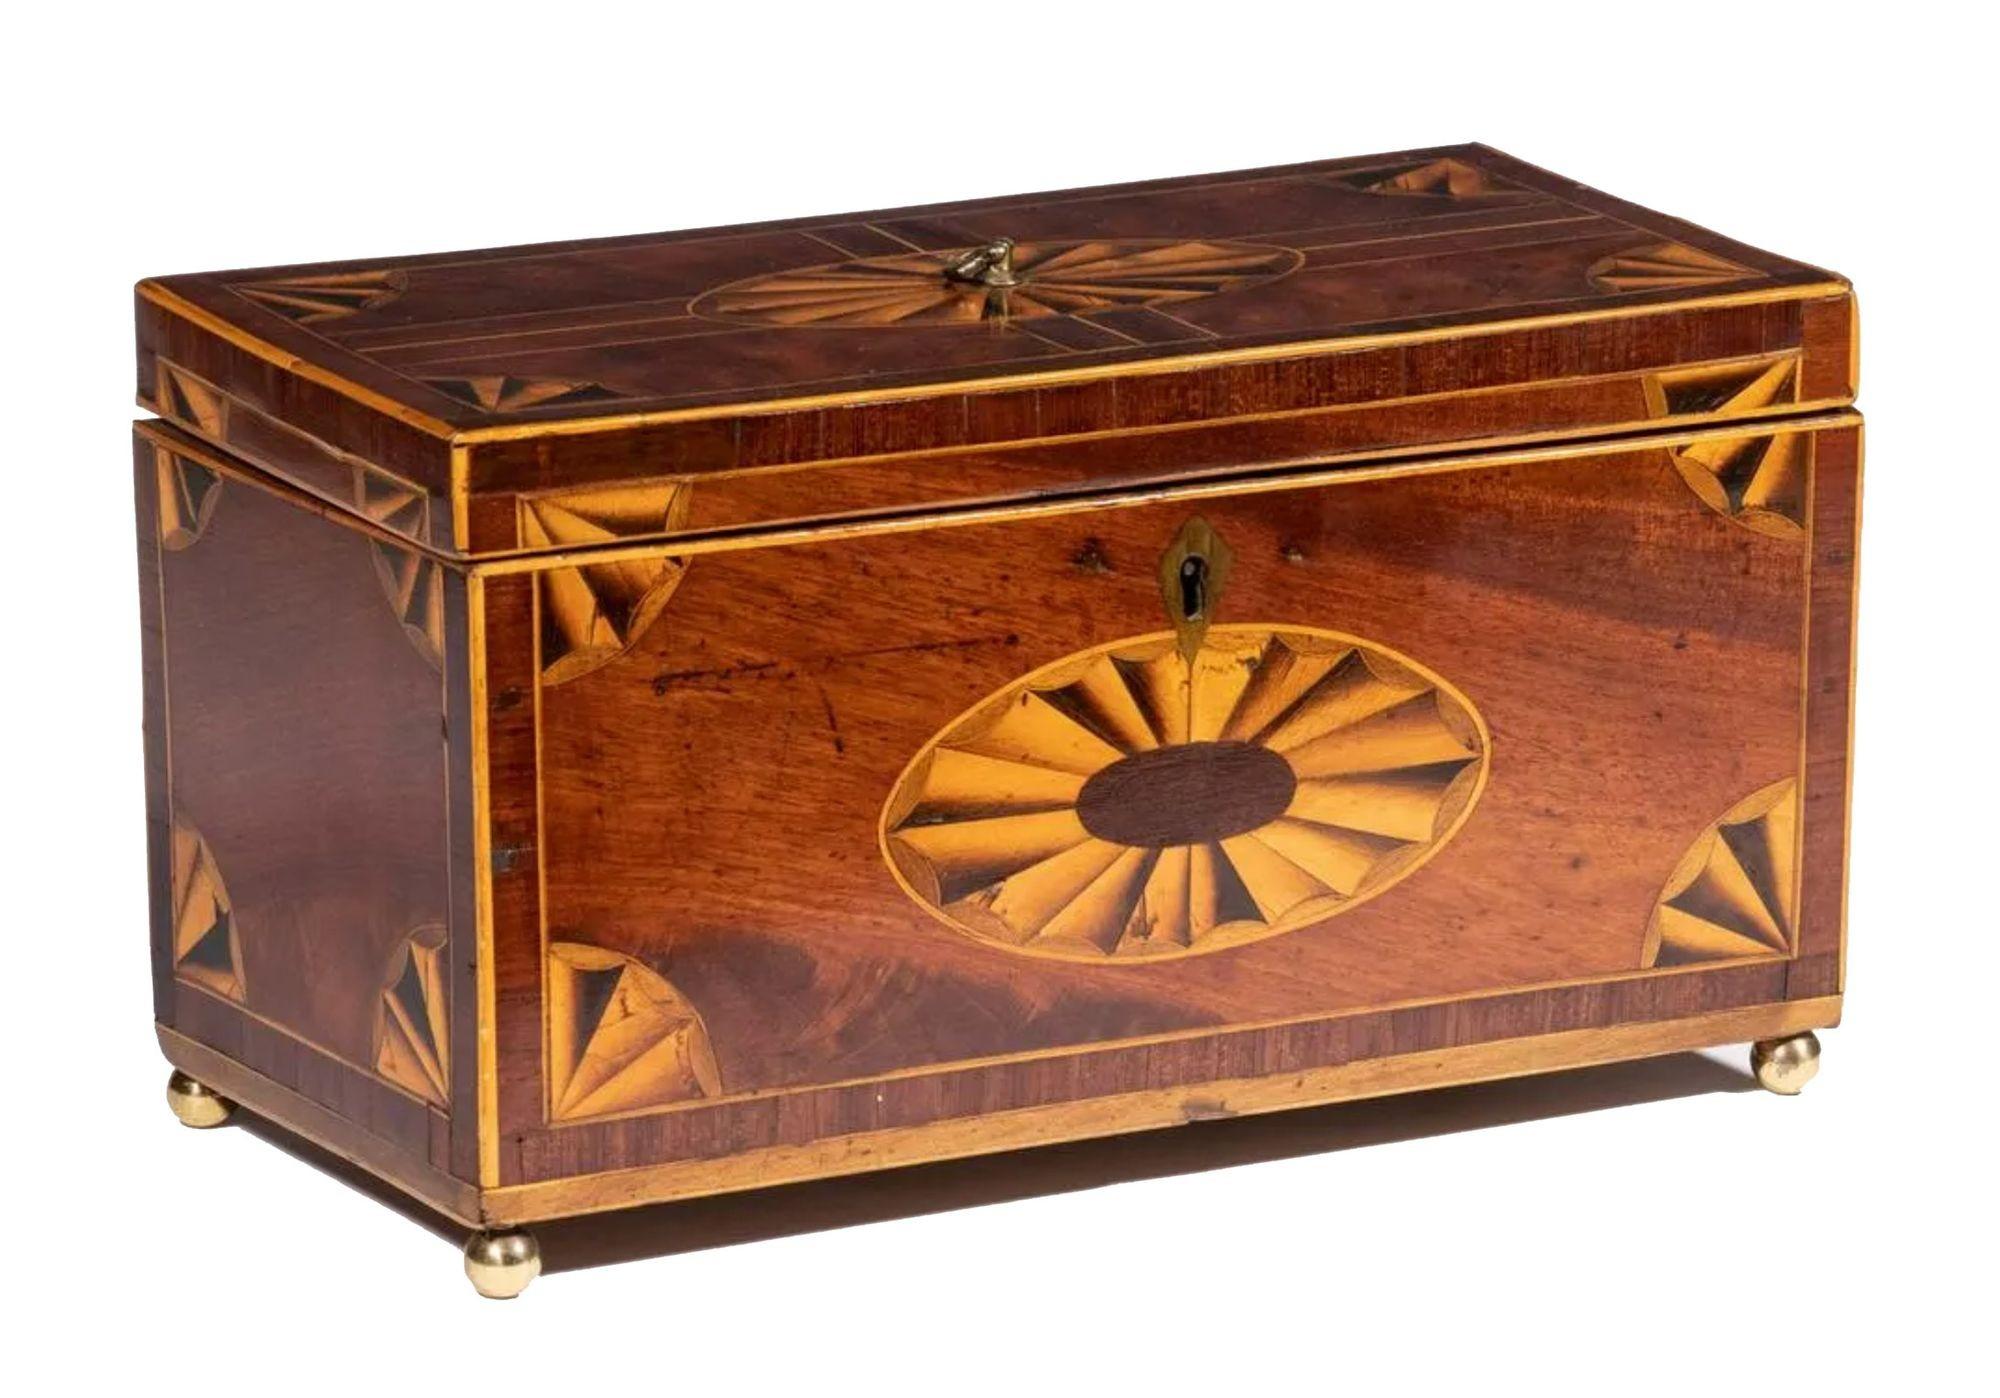 A 19th century English mahogany triple compartment tea caddy. The lid and front panels have an oval fan paterae and corner fan inlays. The interior has three lidded compartments, each lid with an oval floral decorated inlaid panel.
 
Dimensions: 5